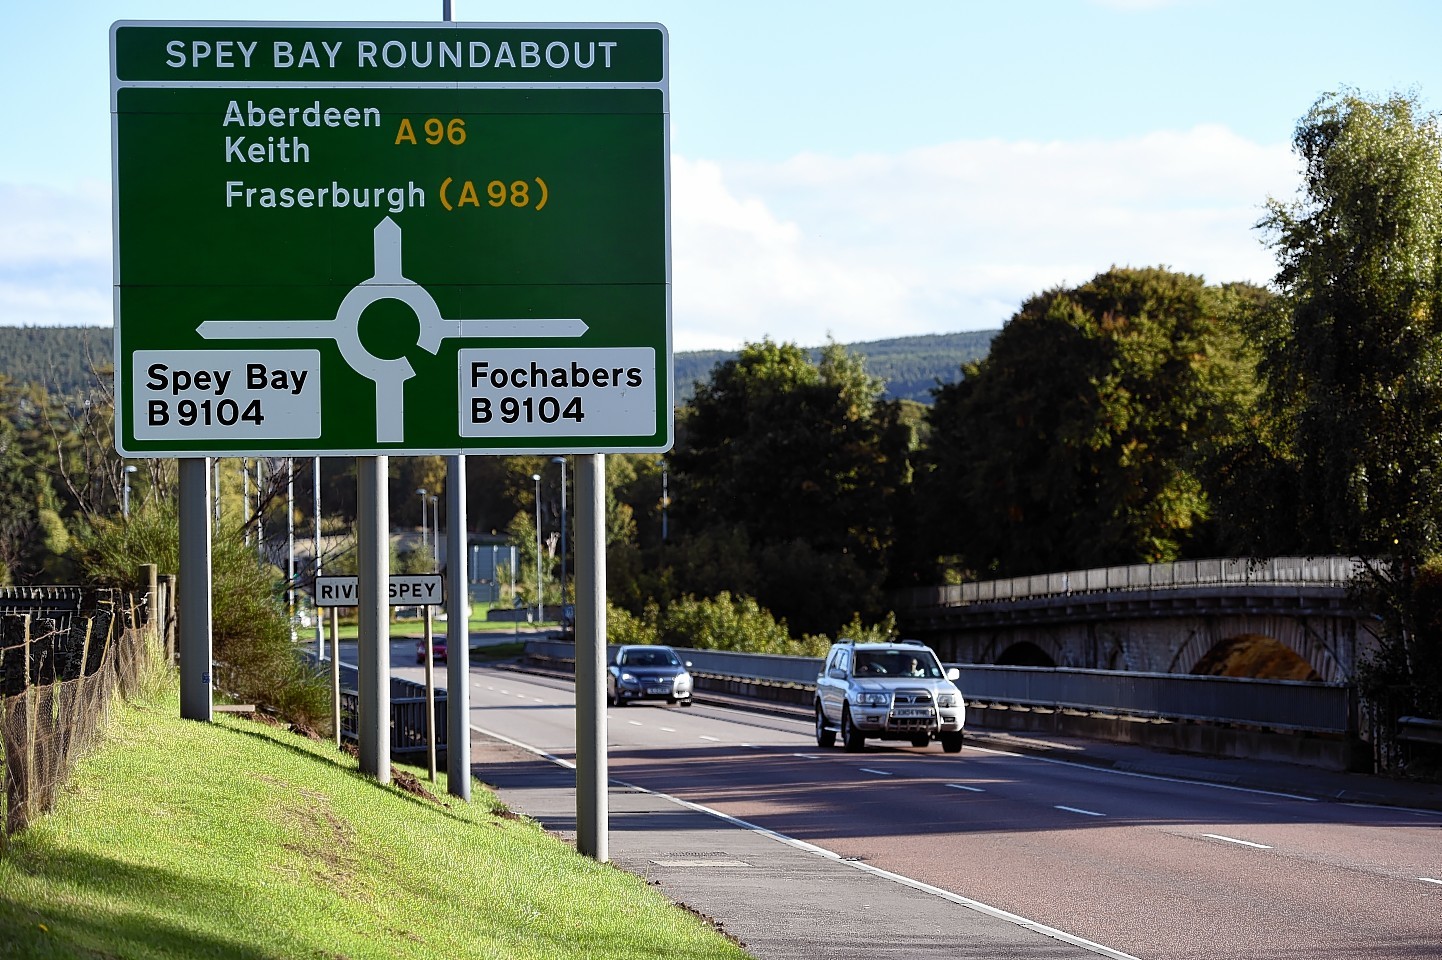 A96 is to be dualled up to Fochabers